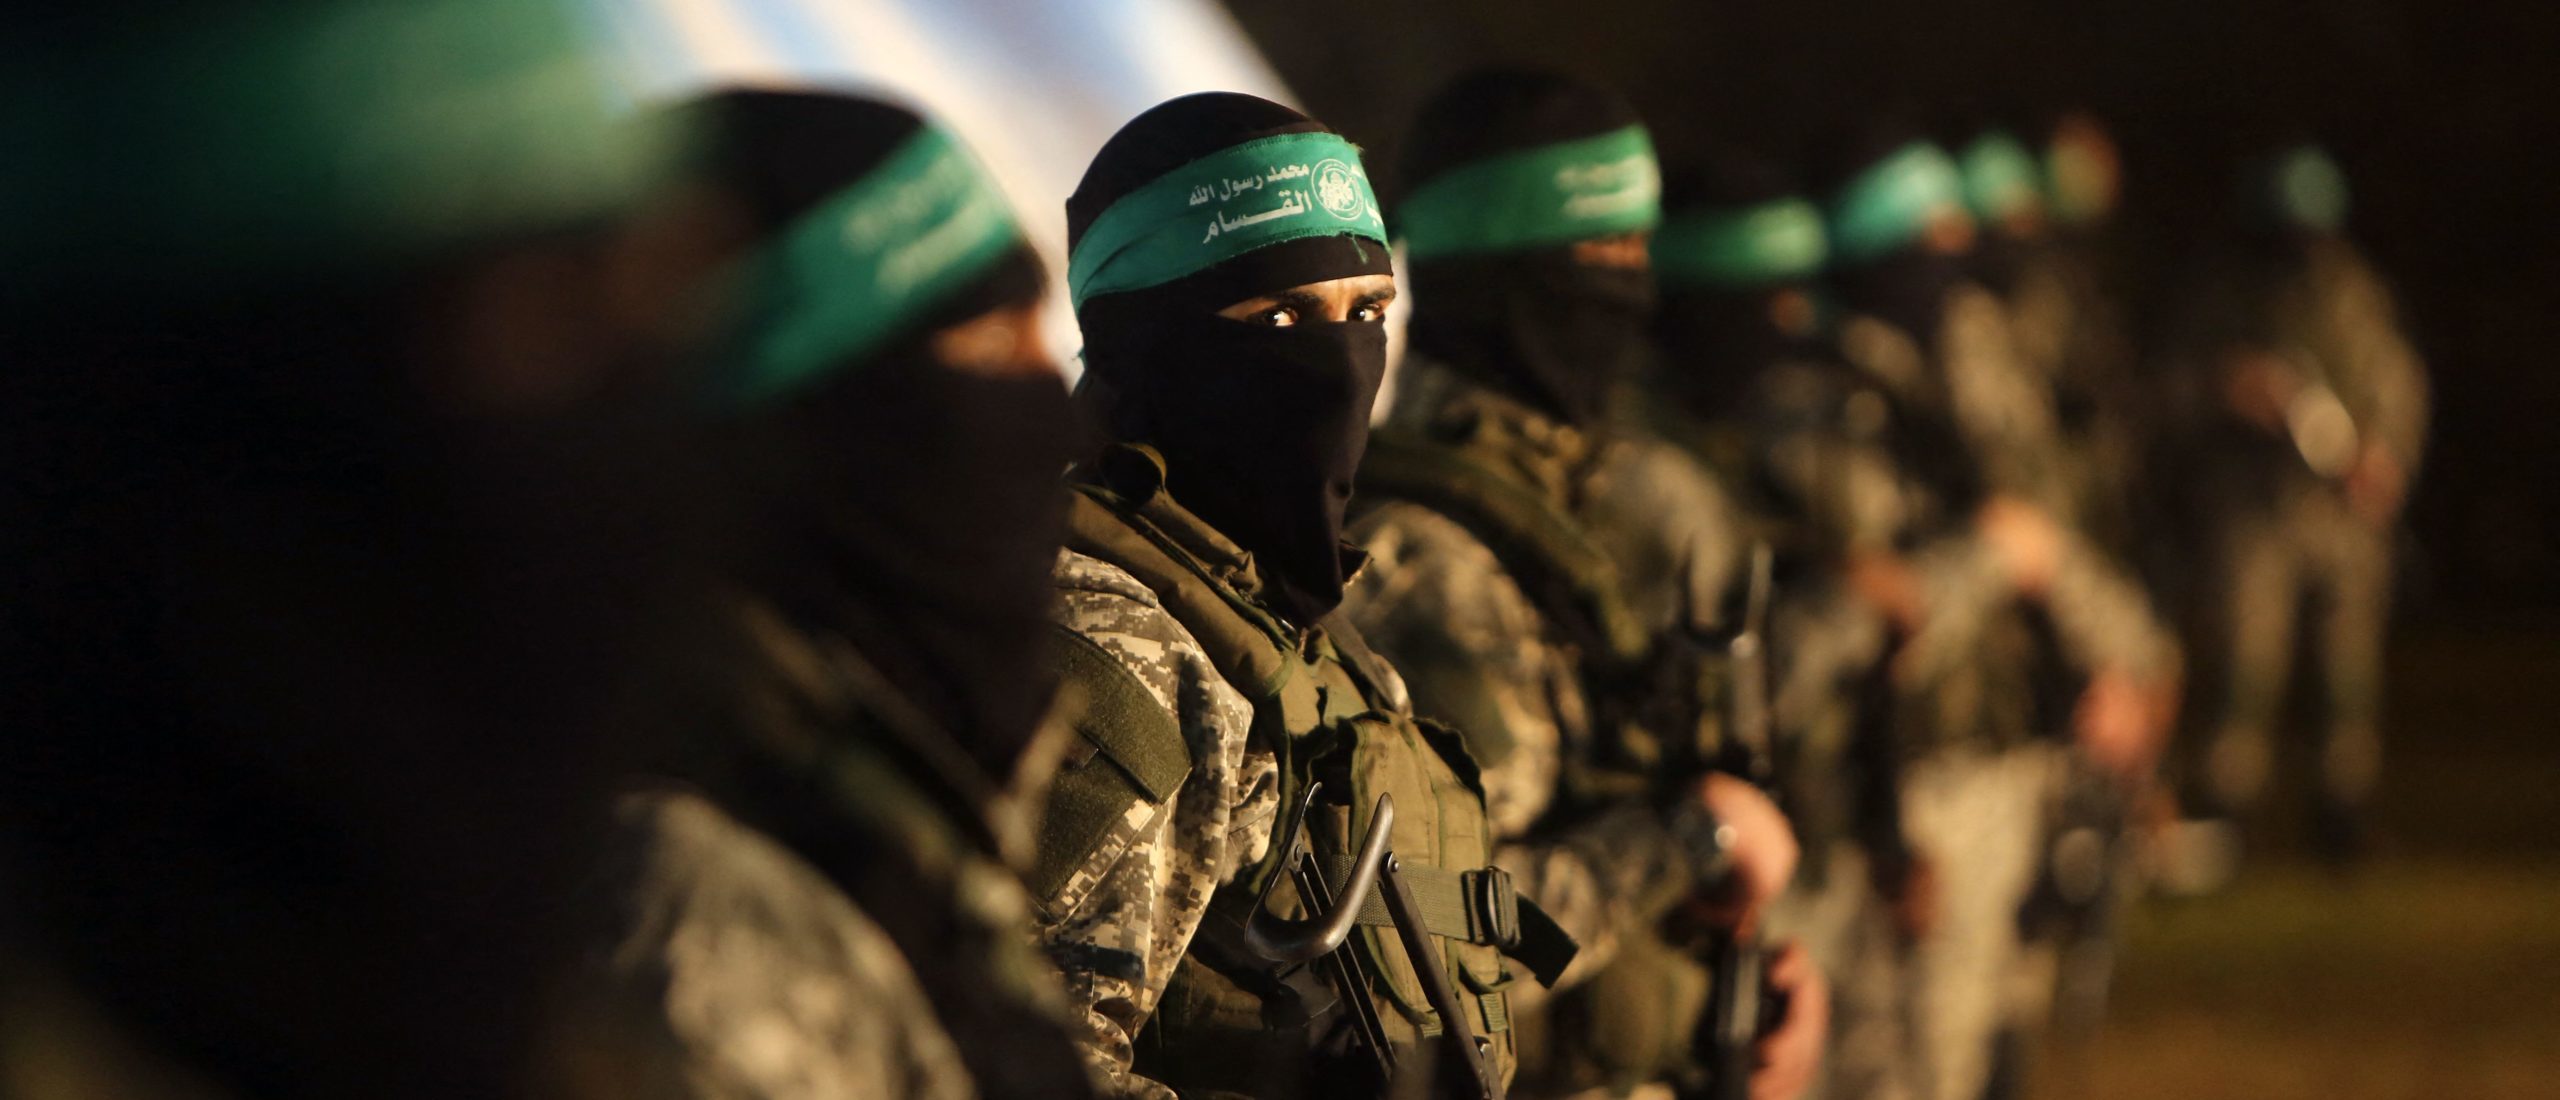 TOPSHOT - Palestinian members of the Ezzedine al-Qassam Brigades, the armed wing of the Hamas movement, take part in a gathering on January 31, 2016 in Gaza city to pay tribute to their fellow militants who died after a tunnel collapsed in the Gaza Strip. Seven Hamas militants were killed on January 28, 2016 after a tunnel built for fighting Israel collapsed in the Gaza Strip, highlighting concerns that yet another conflict could eventually erupt in the Palestinian enclave. (Photo by MAHMUD HAMS / AFP) (Photo by MAHMUD HAMS/AFP via Getty Images)